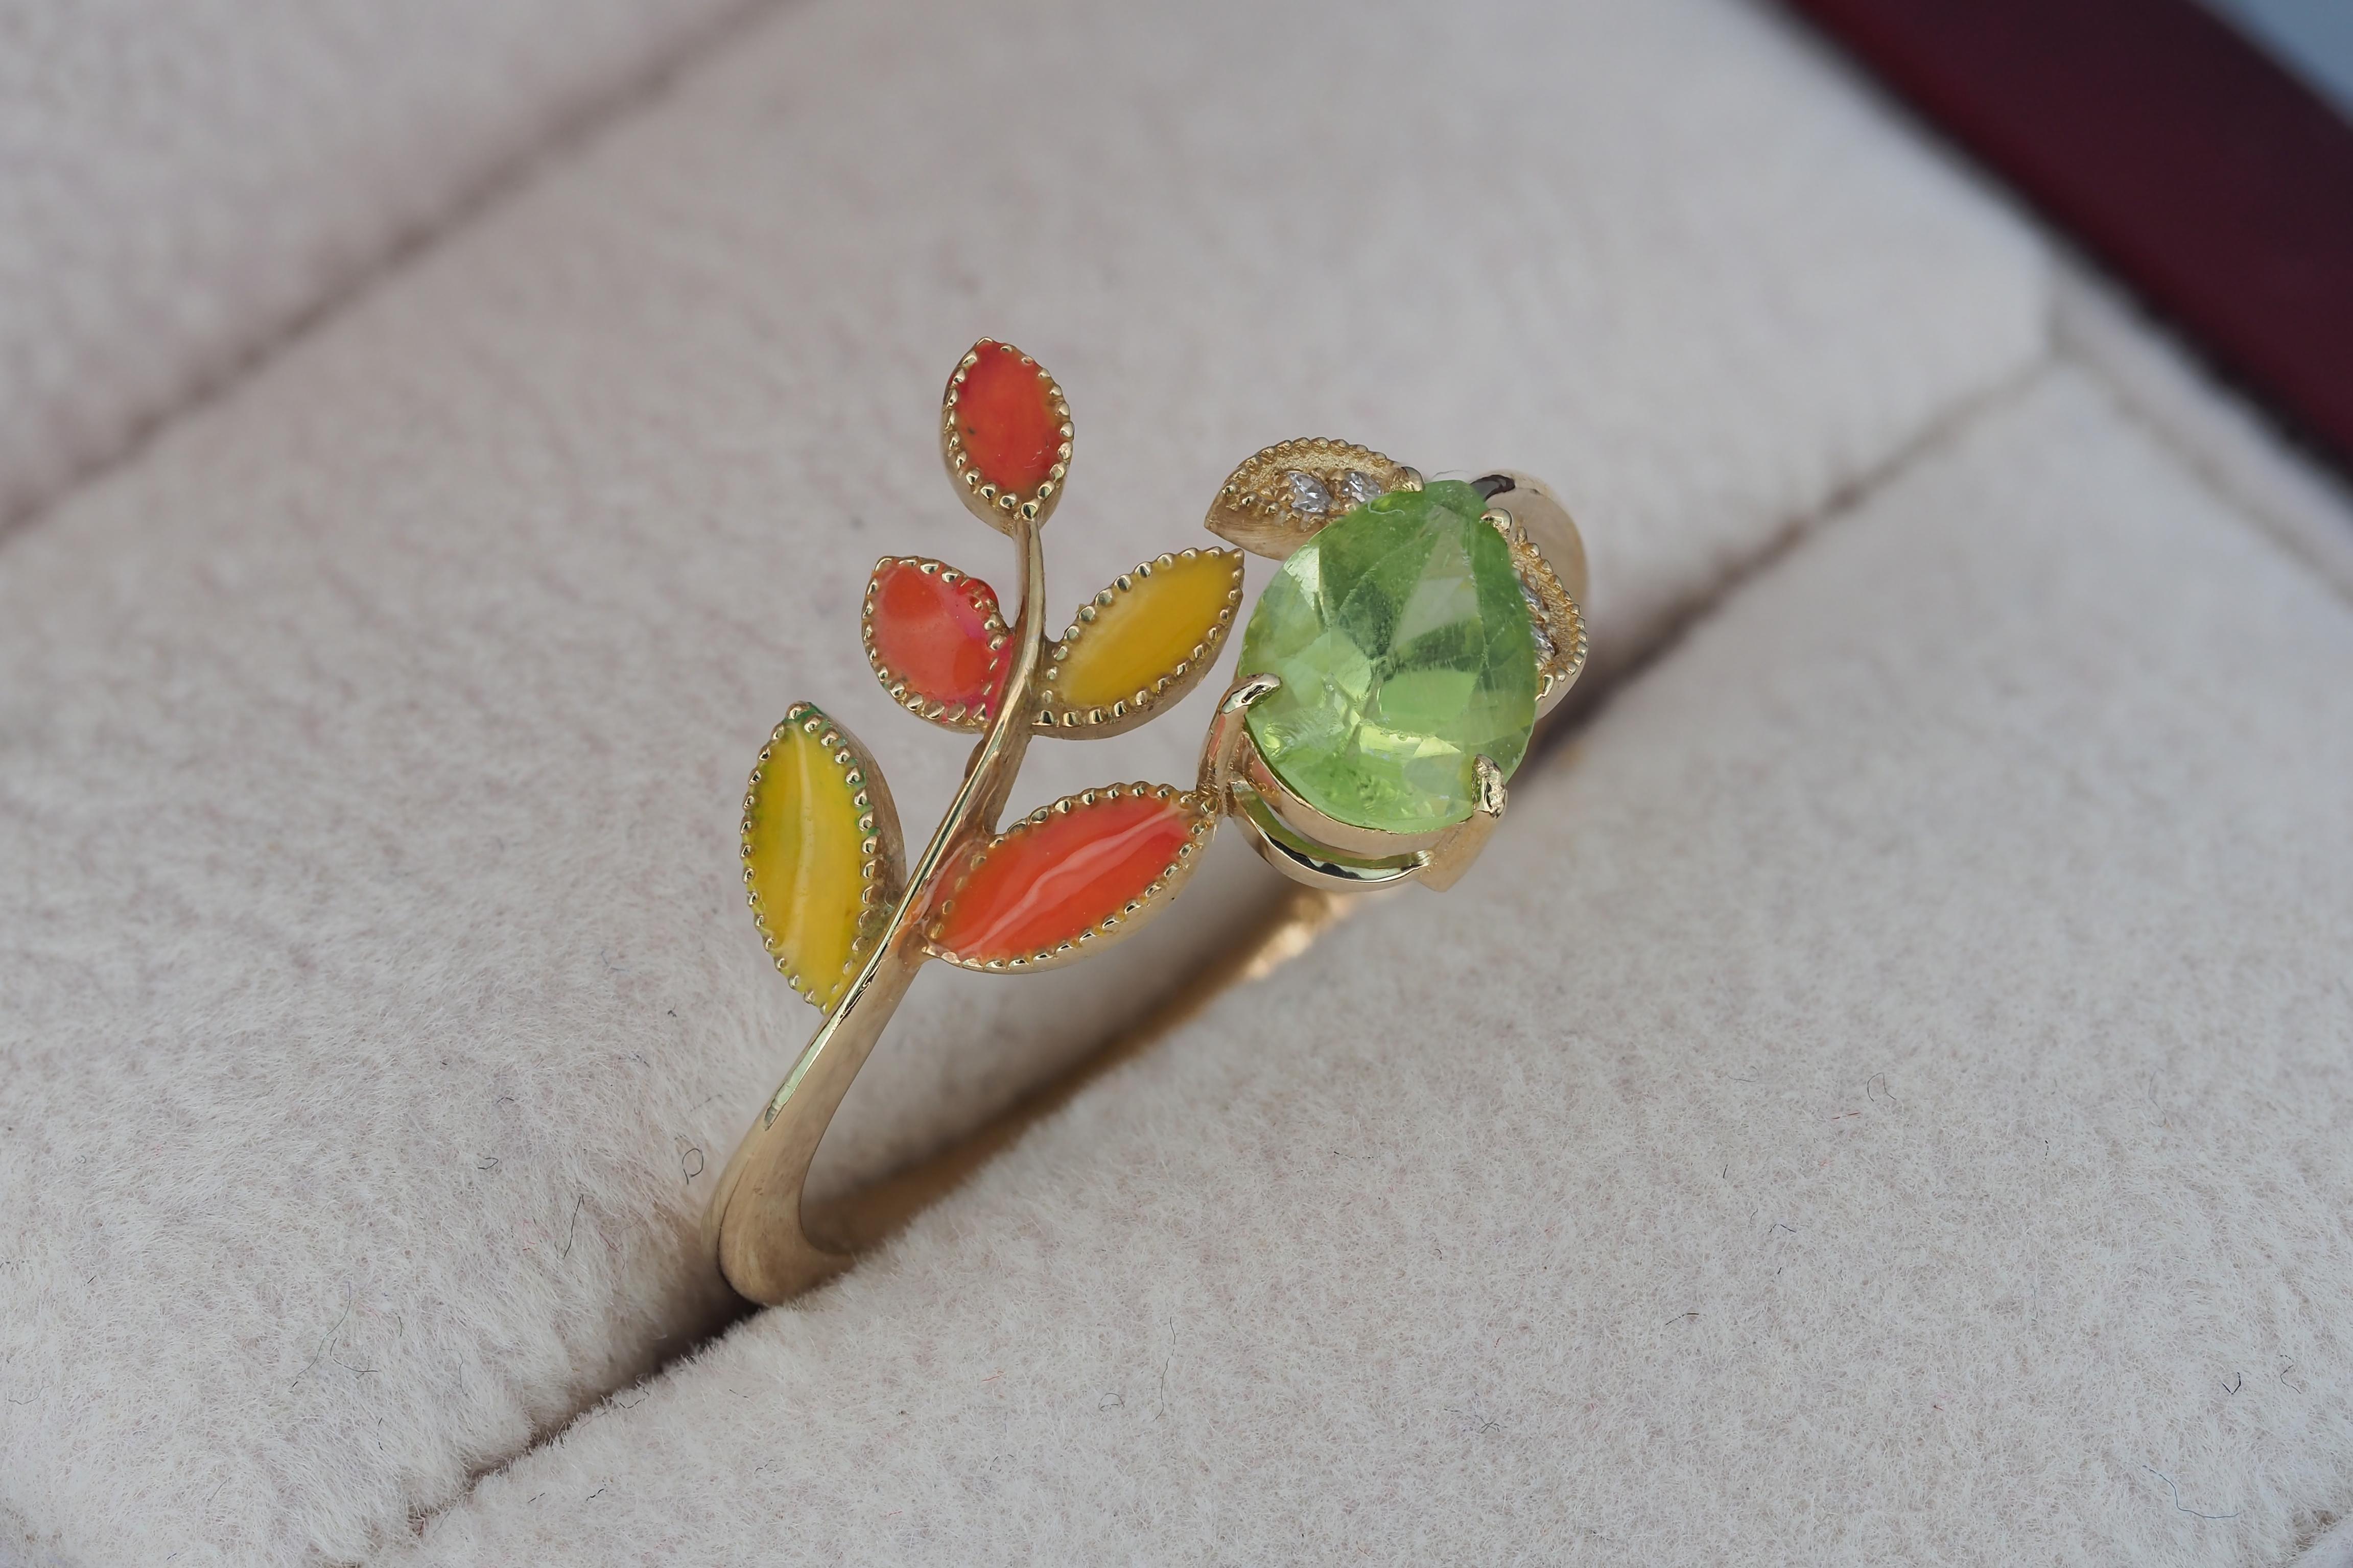 For Sale:  14k Gold Ring with Enamel Autumn Color Leaves with Peridot, Diamonds 8